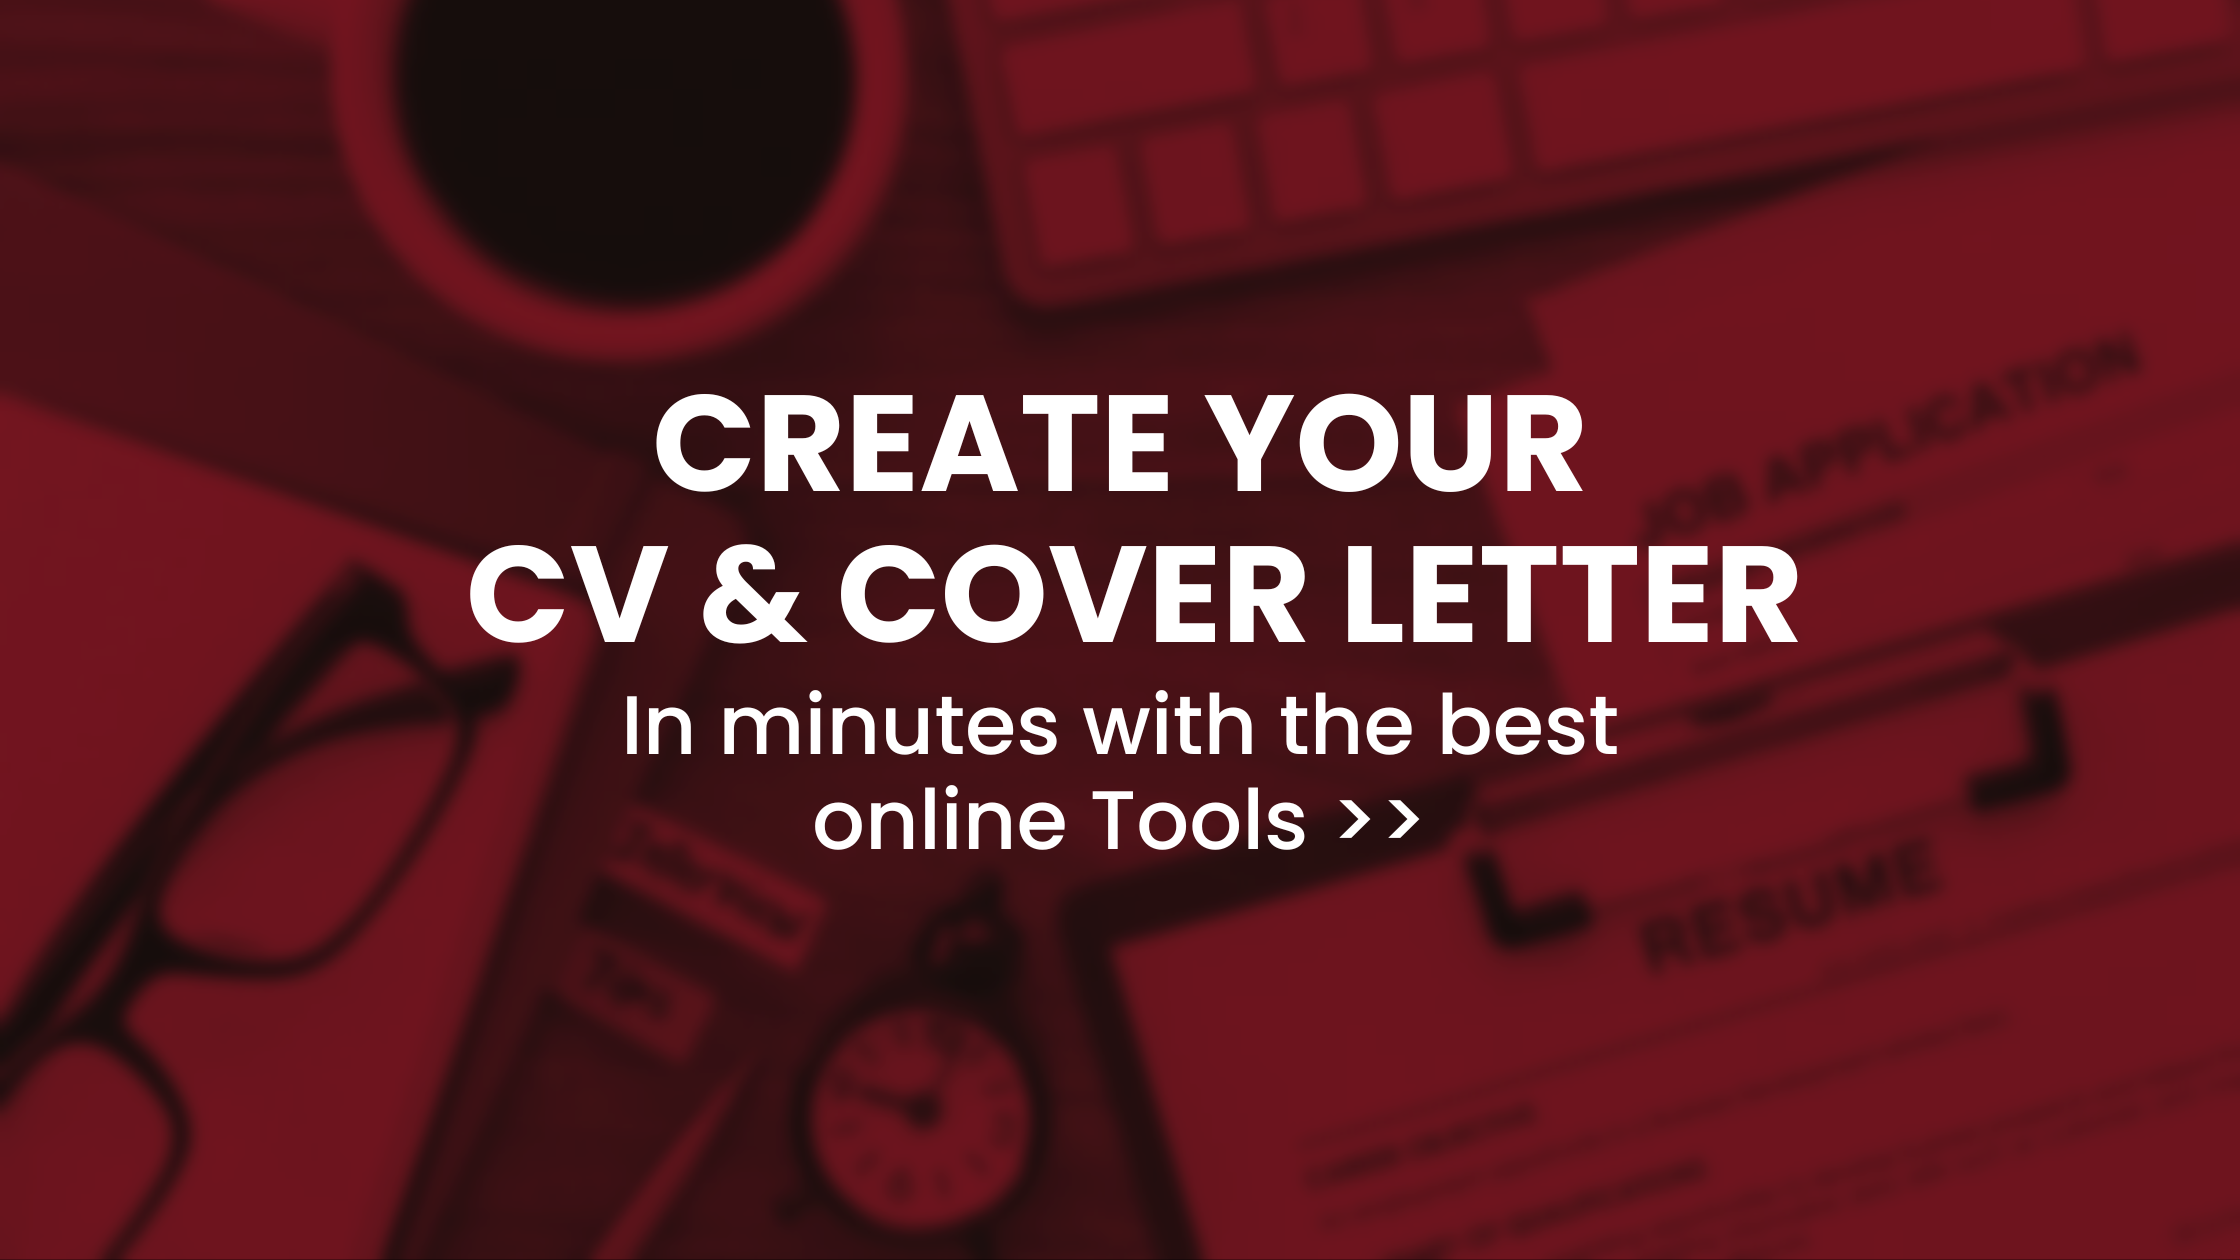 Create a CV/ Cover Letter in seconds-The Quickest way>>